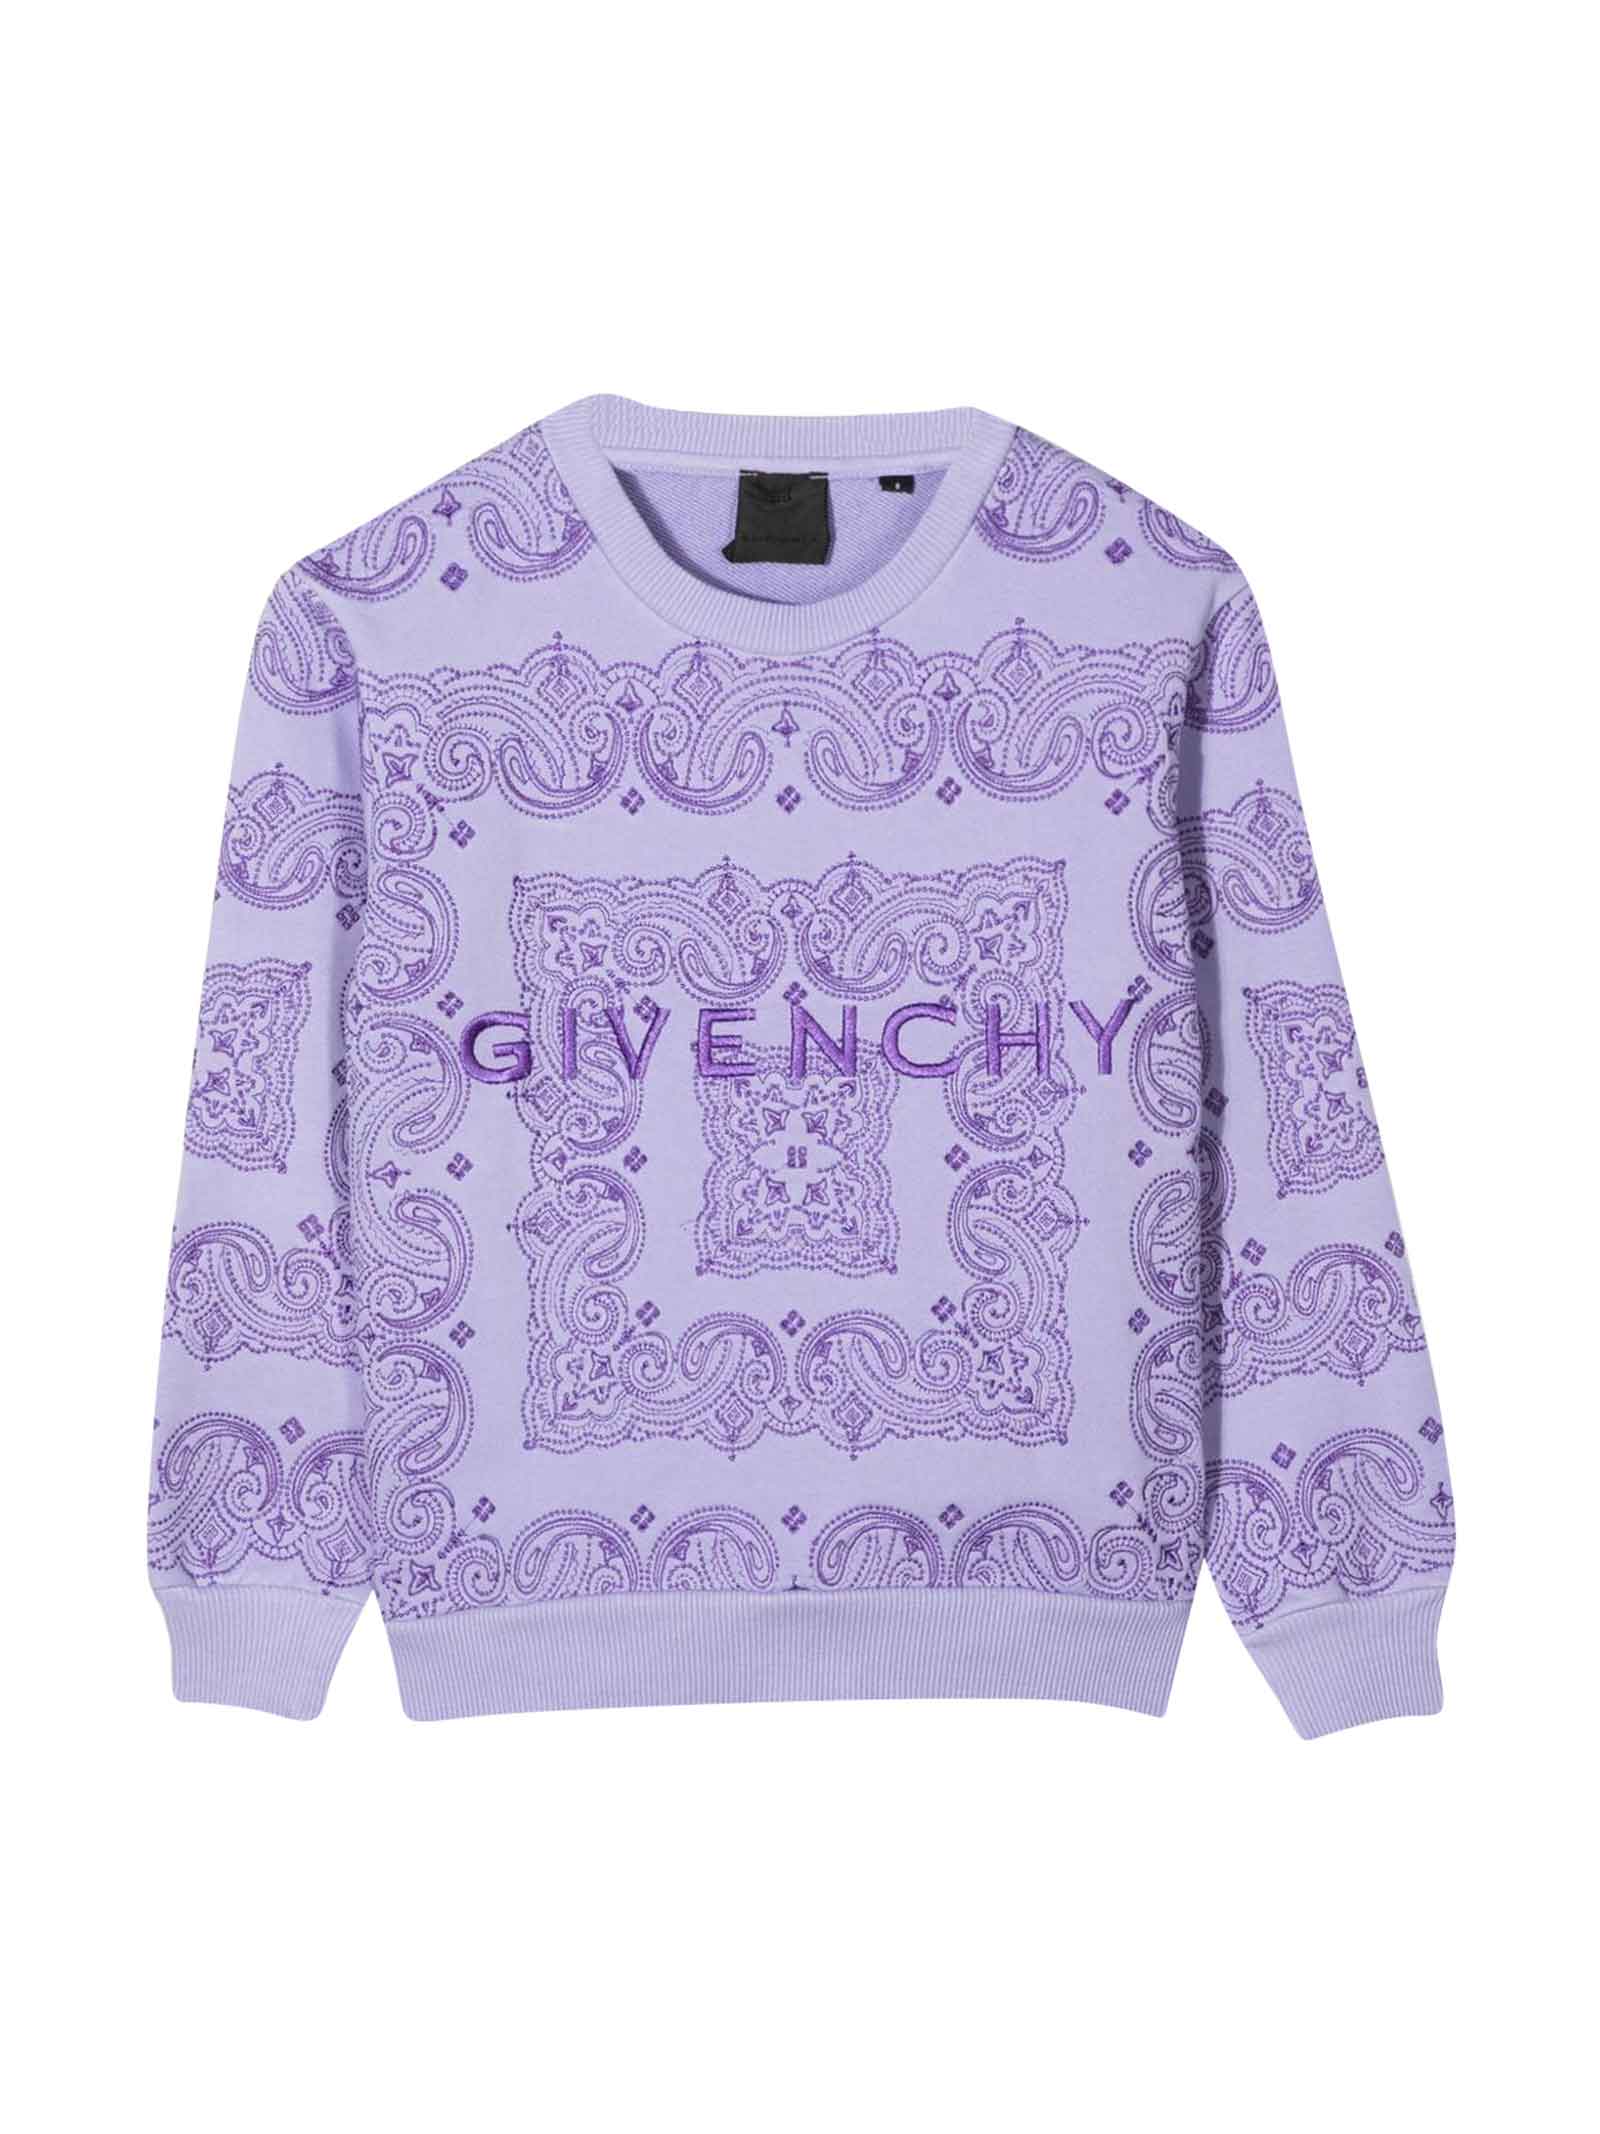 Givenchy Girl Sweatshirt With Embroidery